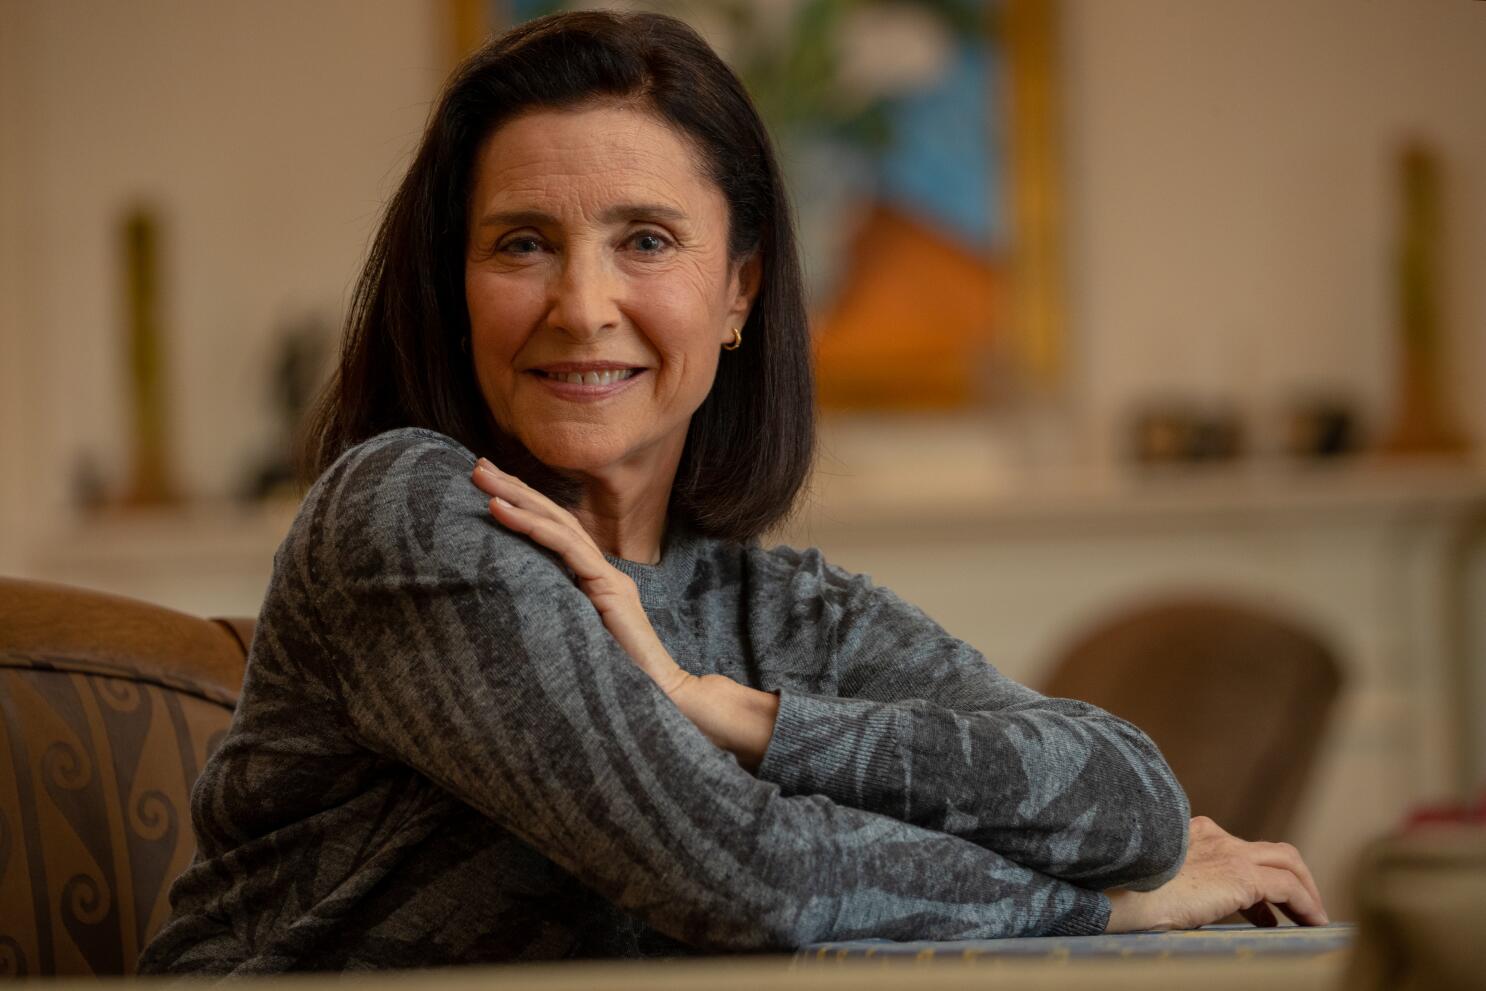 19 Captivating Facts About Mimi Rogers - Facts.net